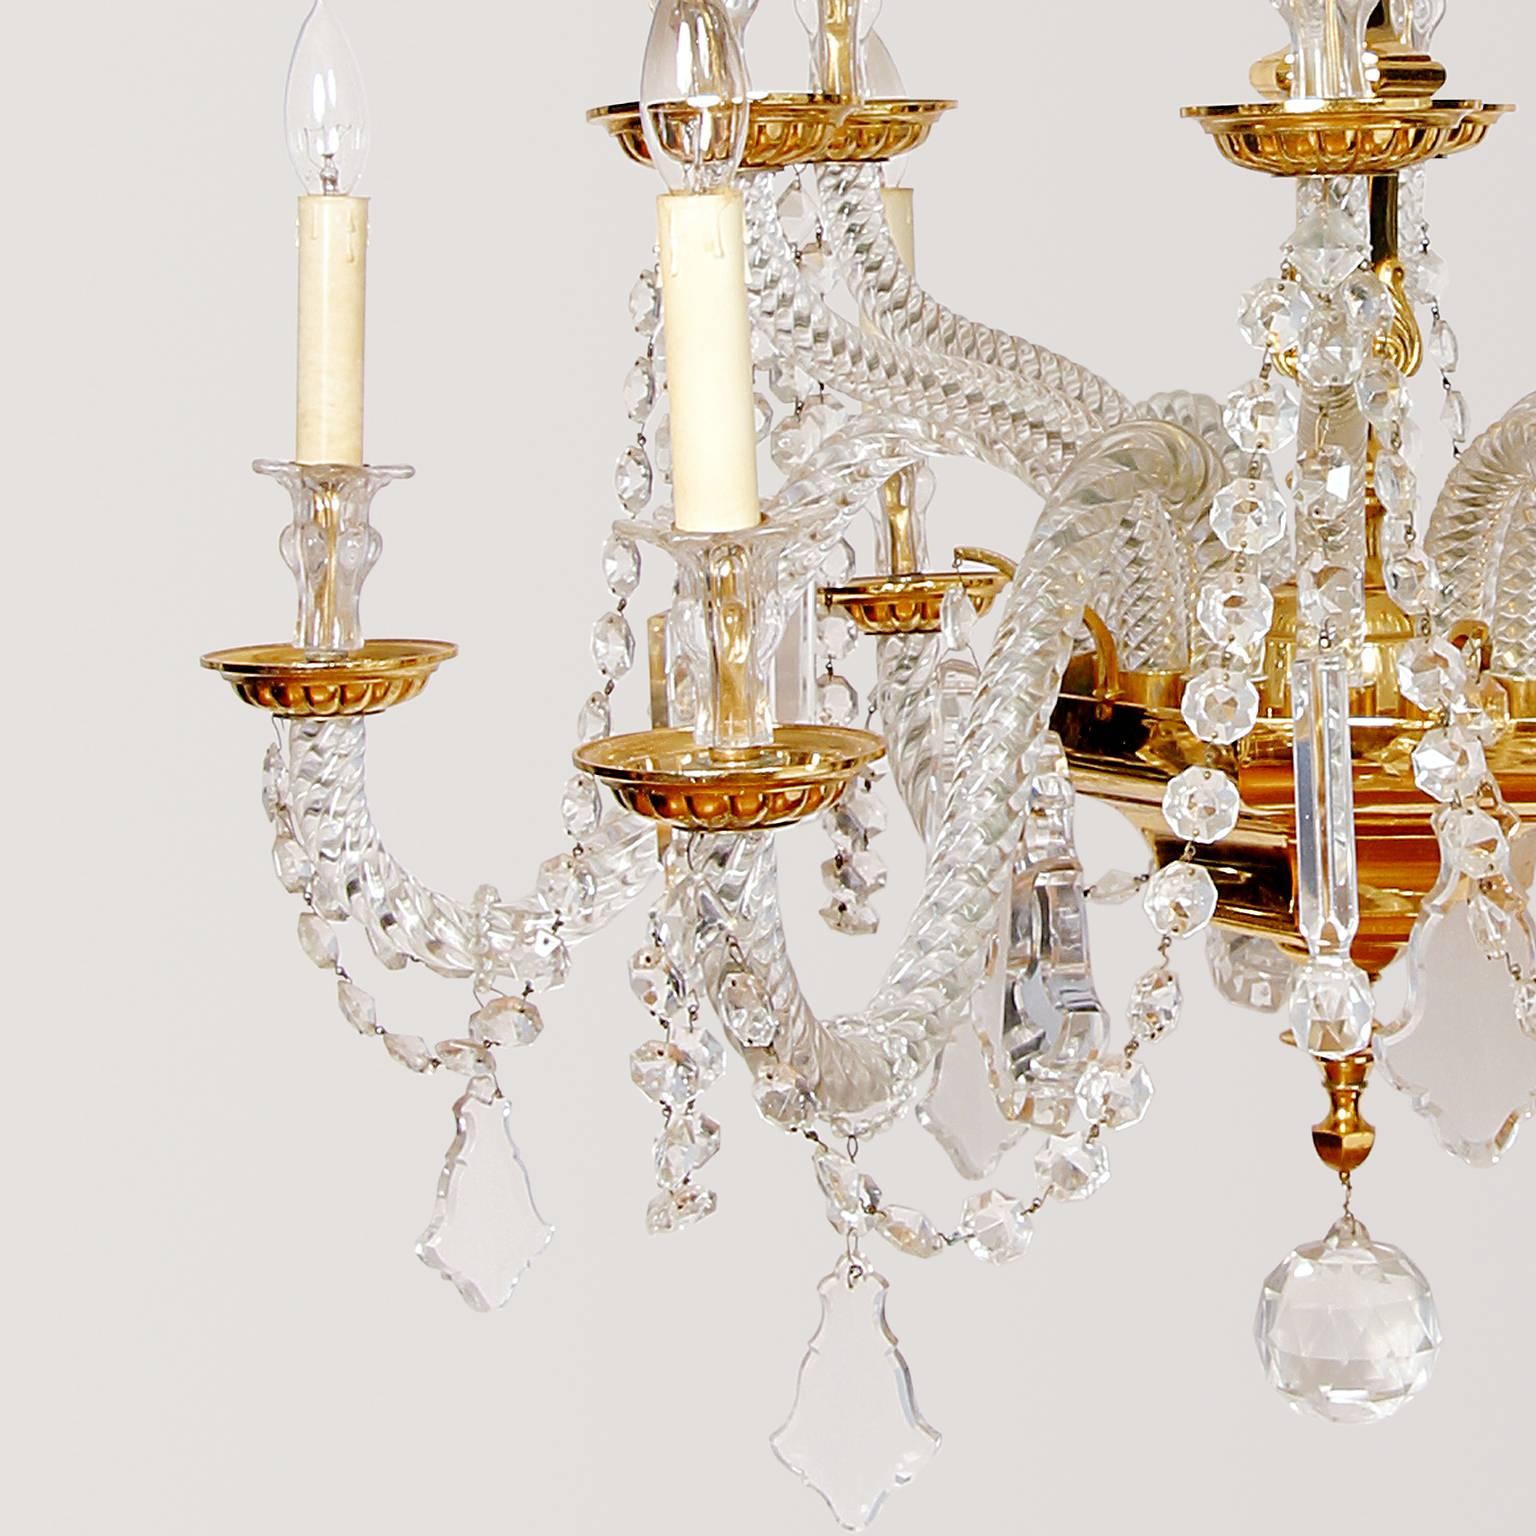 Gold-Plated over Brass and Lead Crystal, Nine-Light, Italian Chandelier In Excellent Condition For Sale In Austin, TX